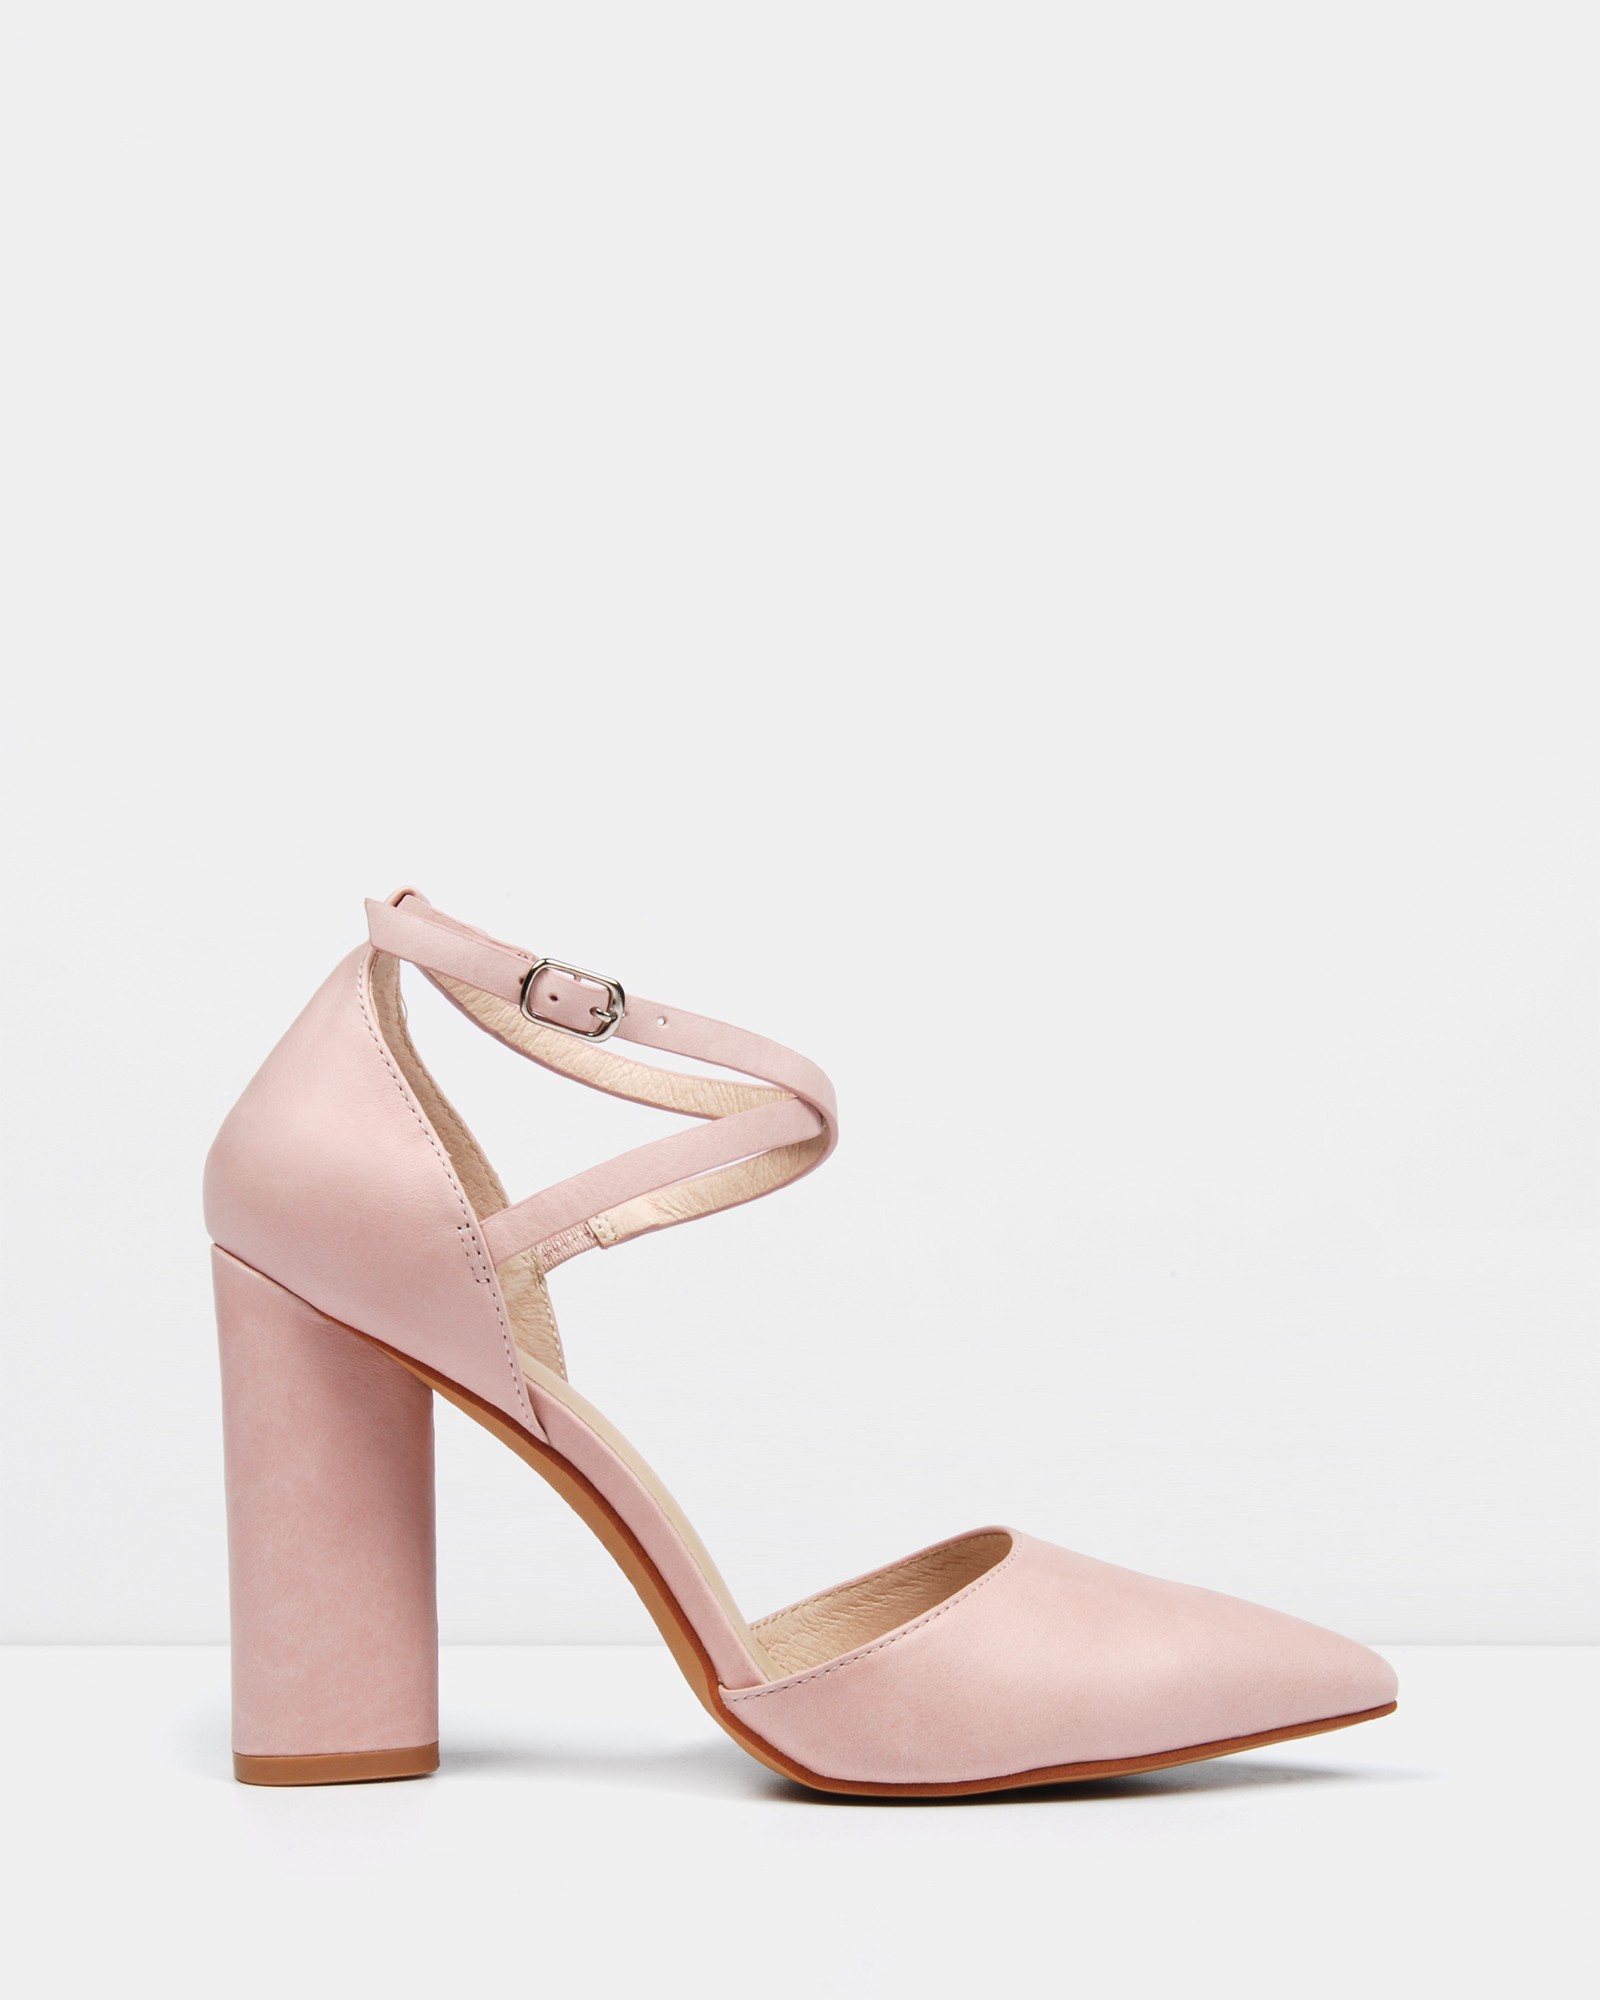 Eastbound Dress High Heels Soft Pink Leather by Jo Mercer | ShoeSales